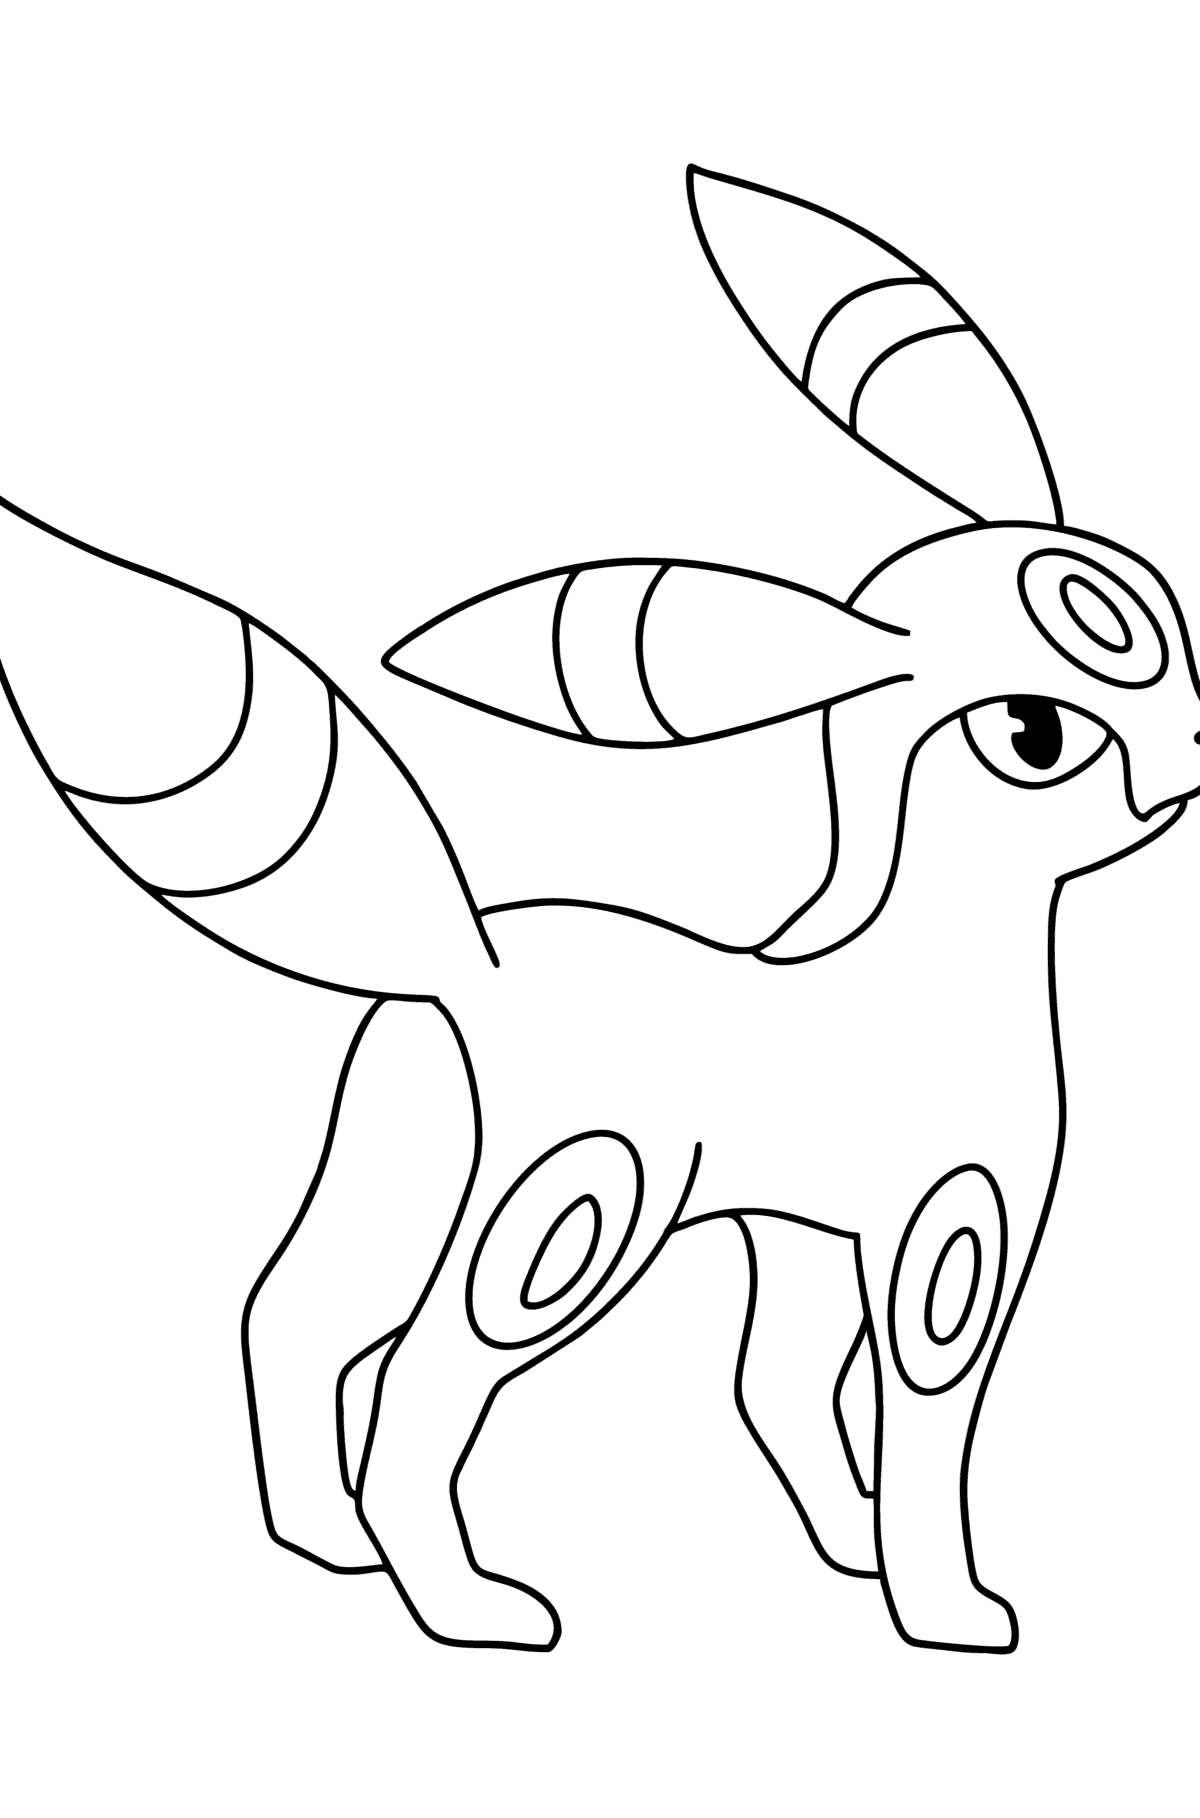 Coloring page Pokemon Go Umbreon - Coloring Pages for Kids